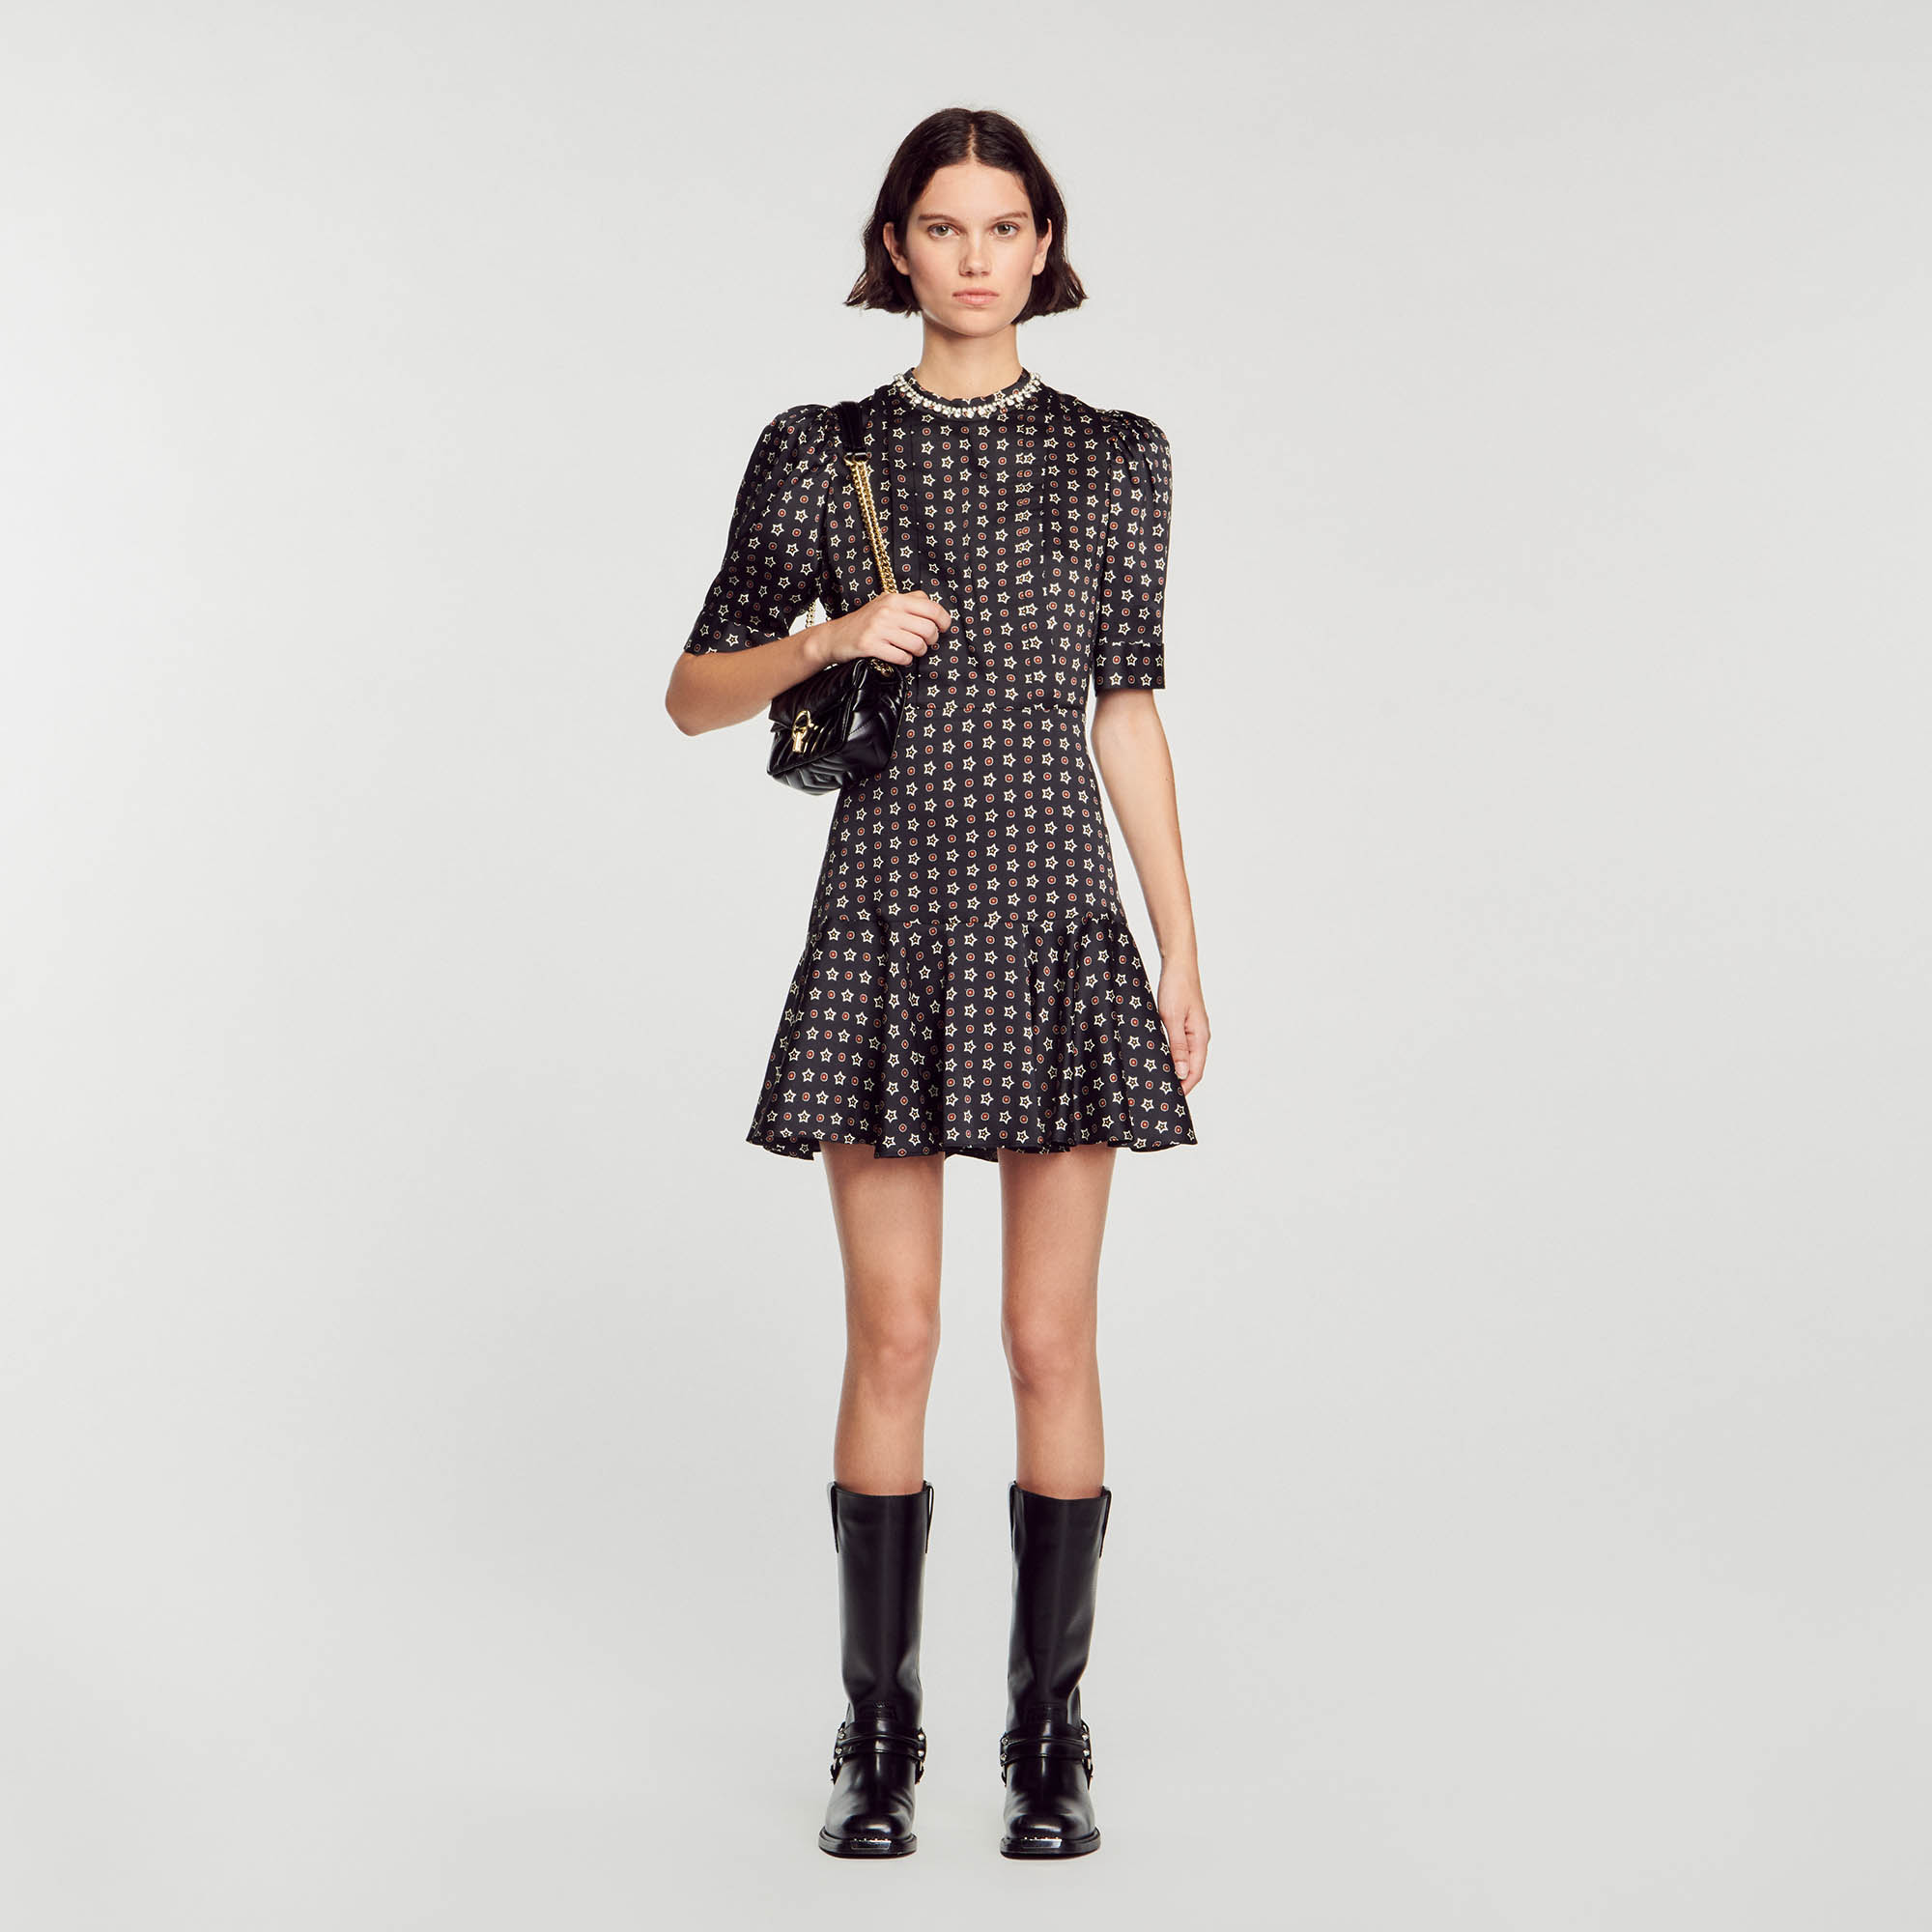 Sandro polyester Lining: Short flowing dress with a round rhinestone neckline, short sleeves, a ruffled skirt, and an all-over Mini Stars print